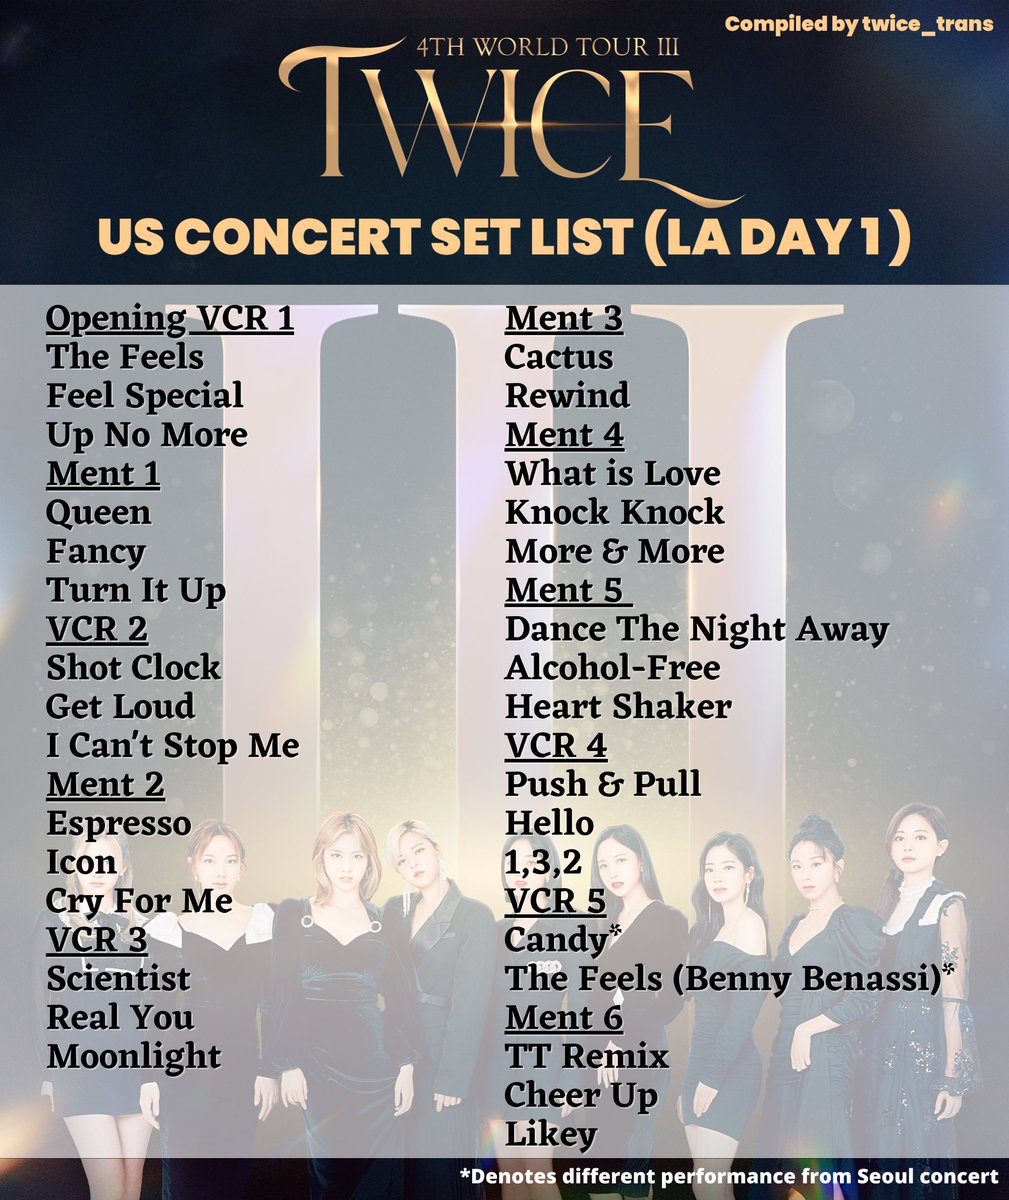 Twice Trans Setlist Twice Iii World Tour Us Concert Setlist Los Angeles Day 1 Ver Compiled By Twice Trans Twice Twiceinla Twice 4th World Tour T Co Bagfou4sx1 Twitter